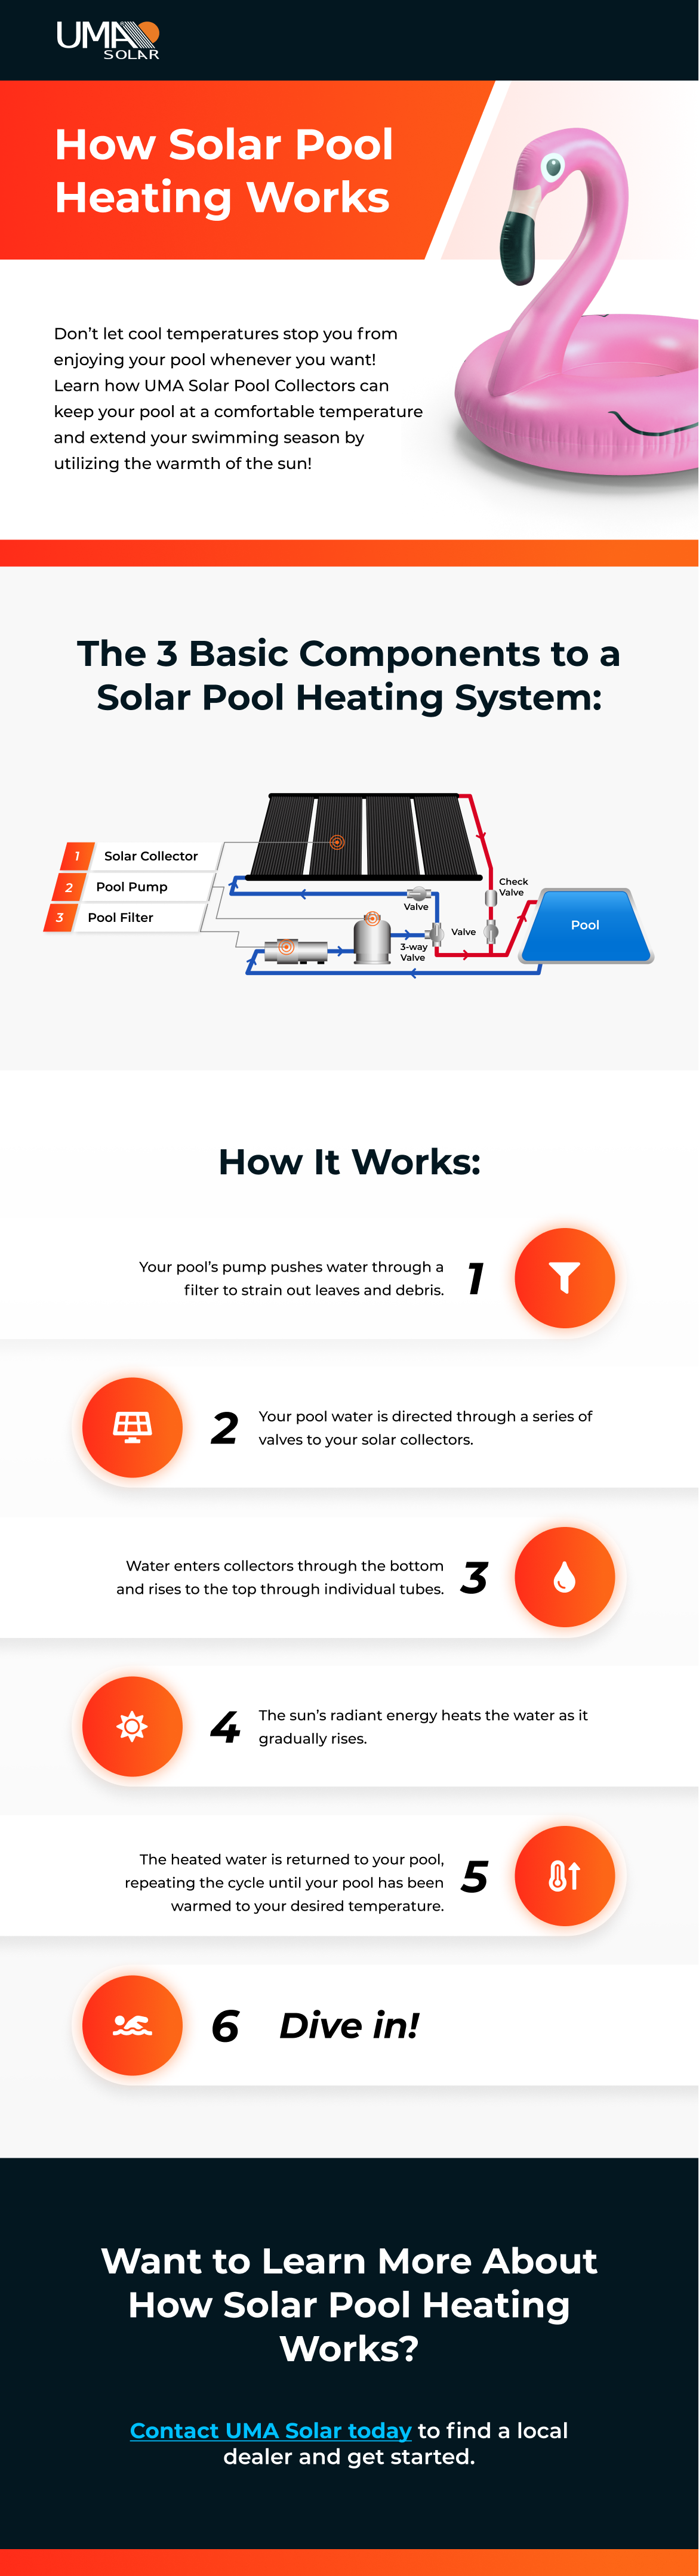 How Solar Pool Heating Systems Work In 6 Steps [Infographic] 1